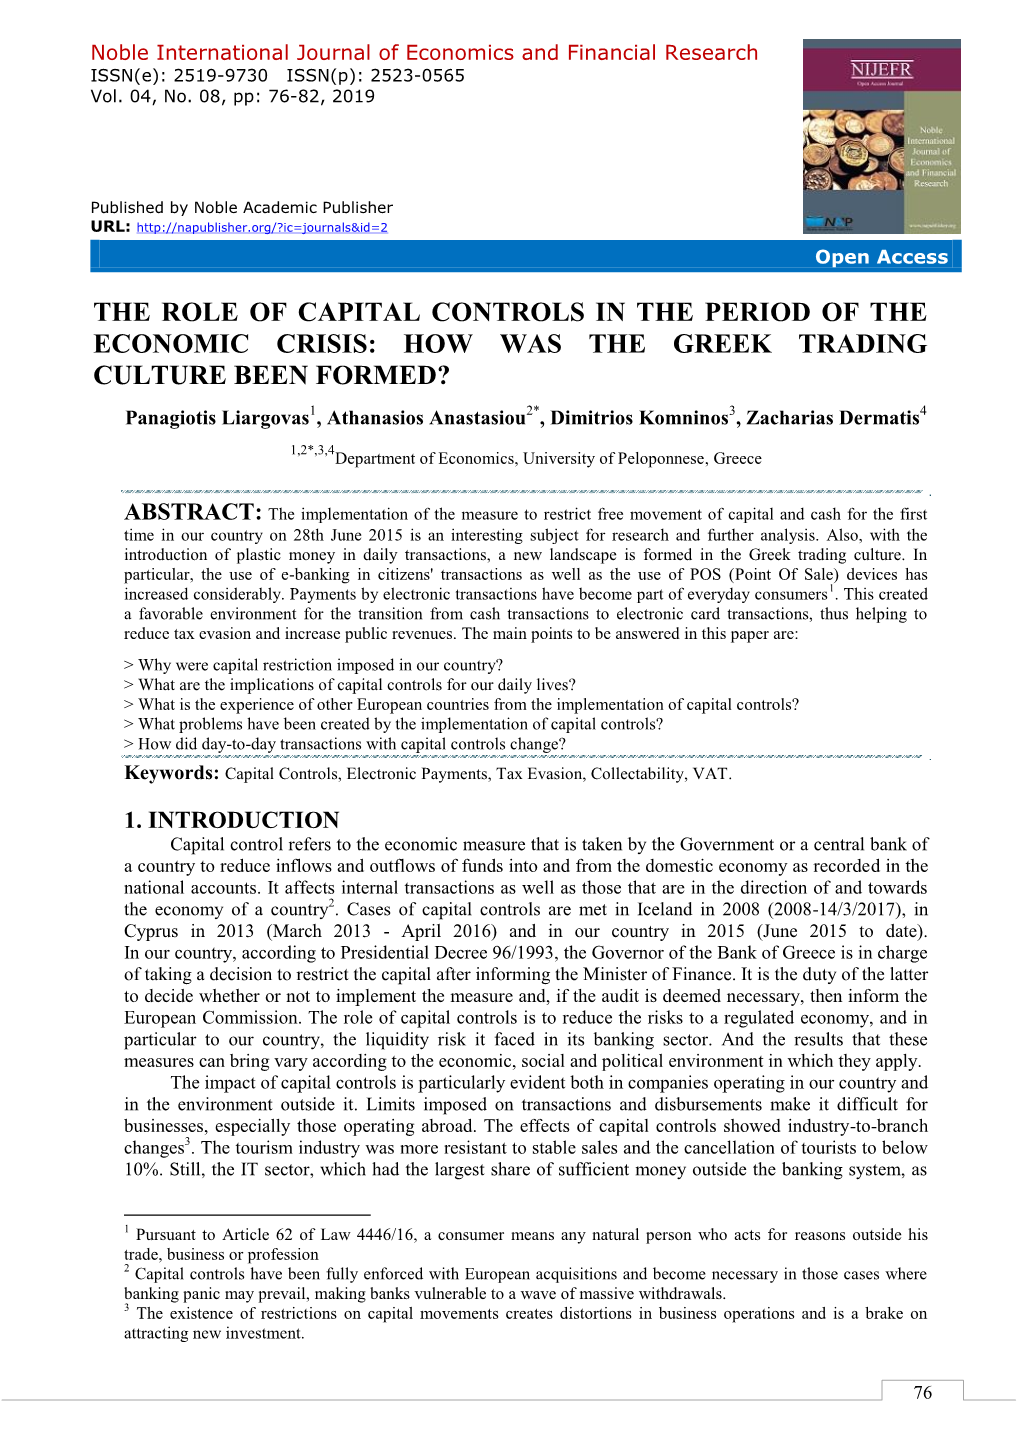 The Role of Capital Controls in the Period of the Economic Crisis: How Was the Greek Trading Culture Been Formed?